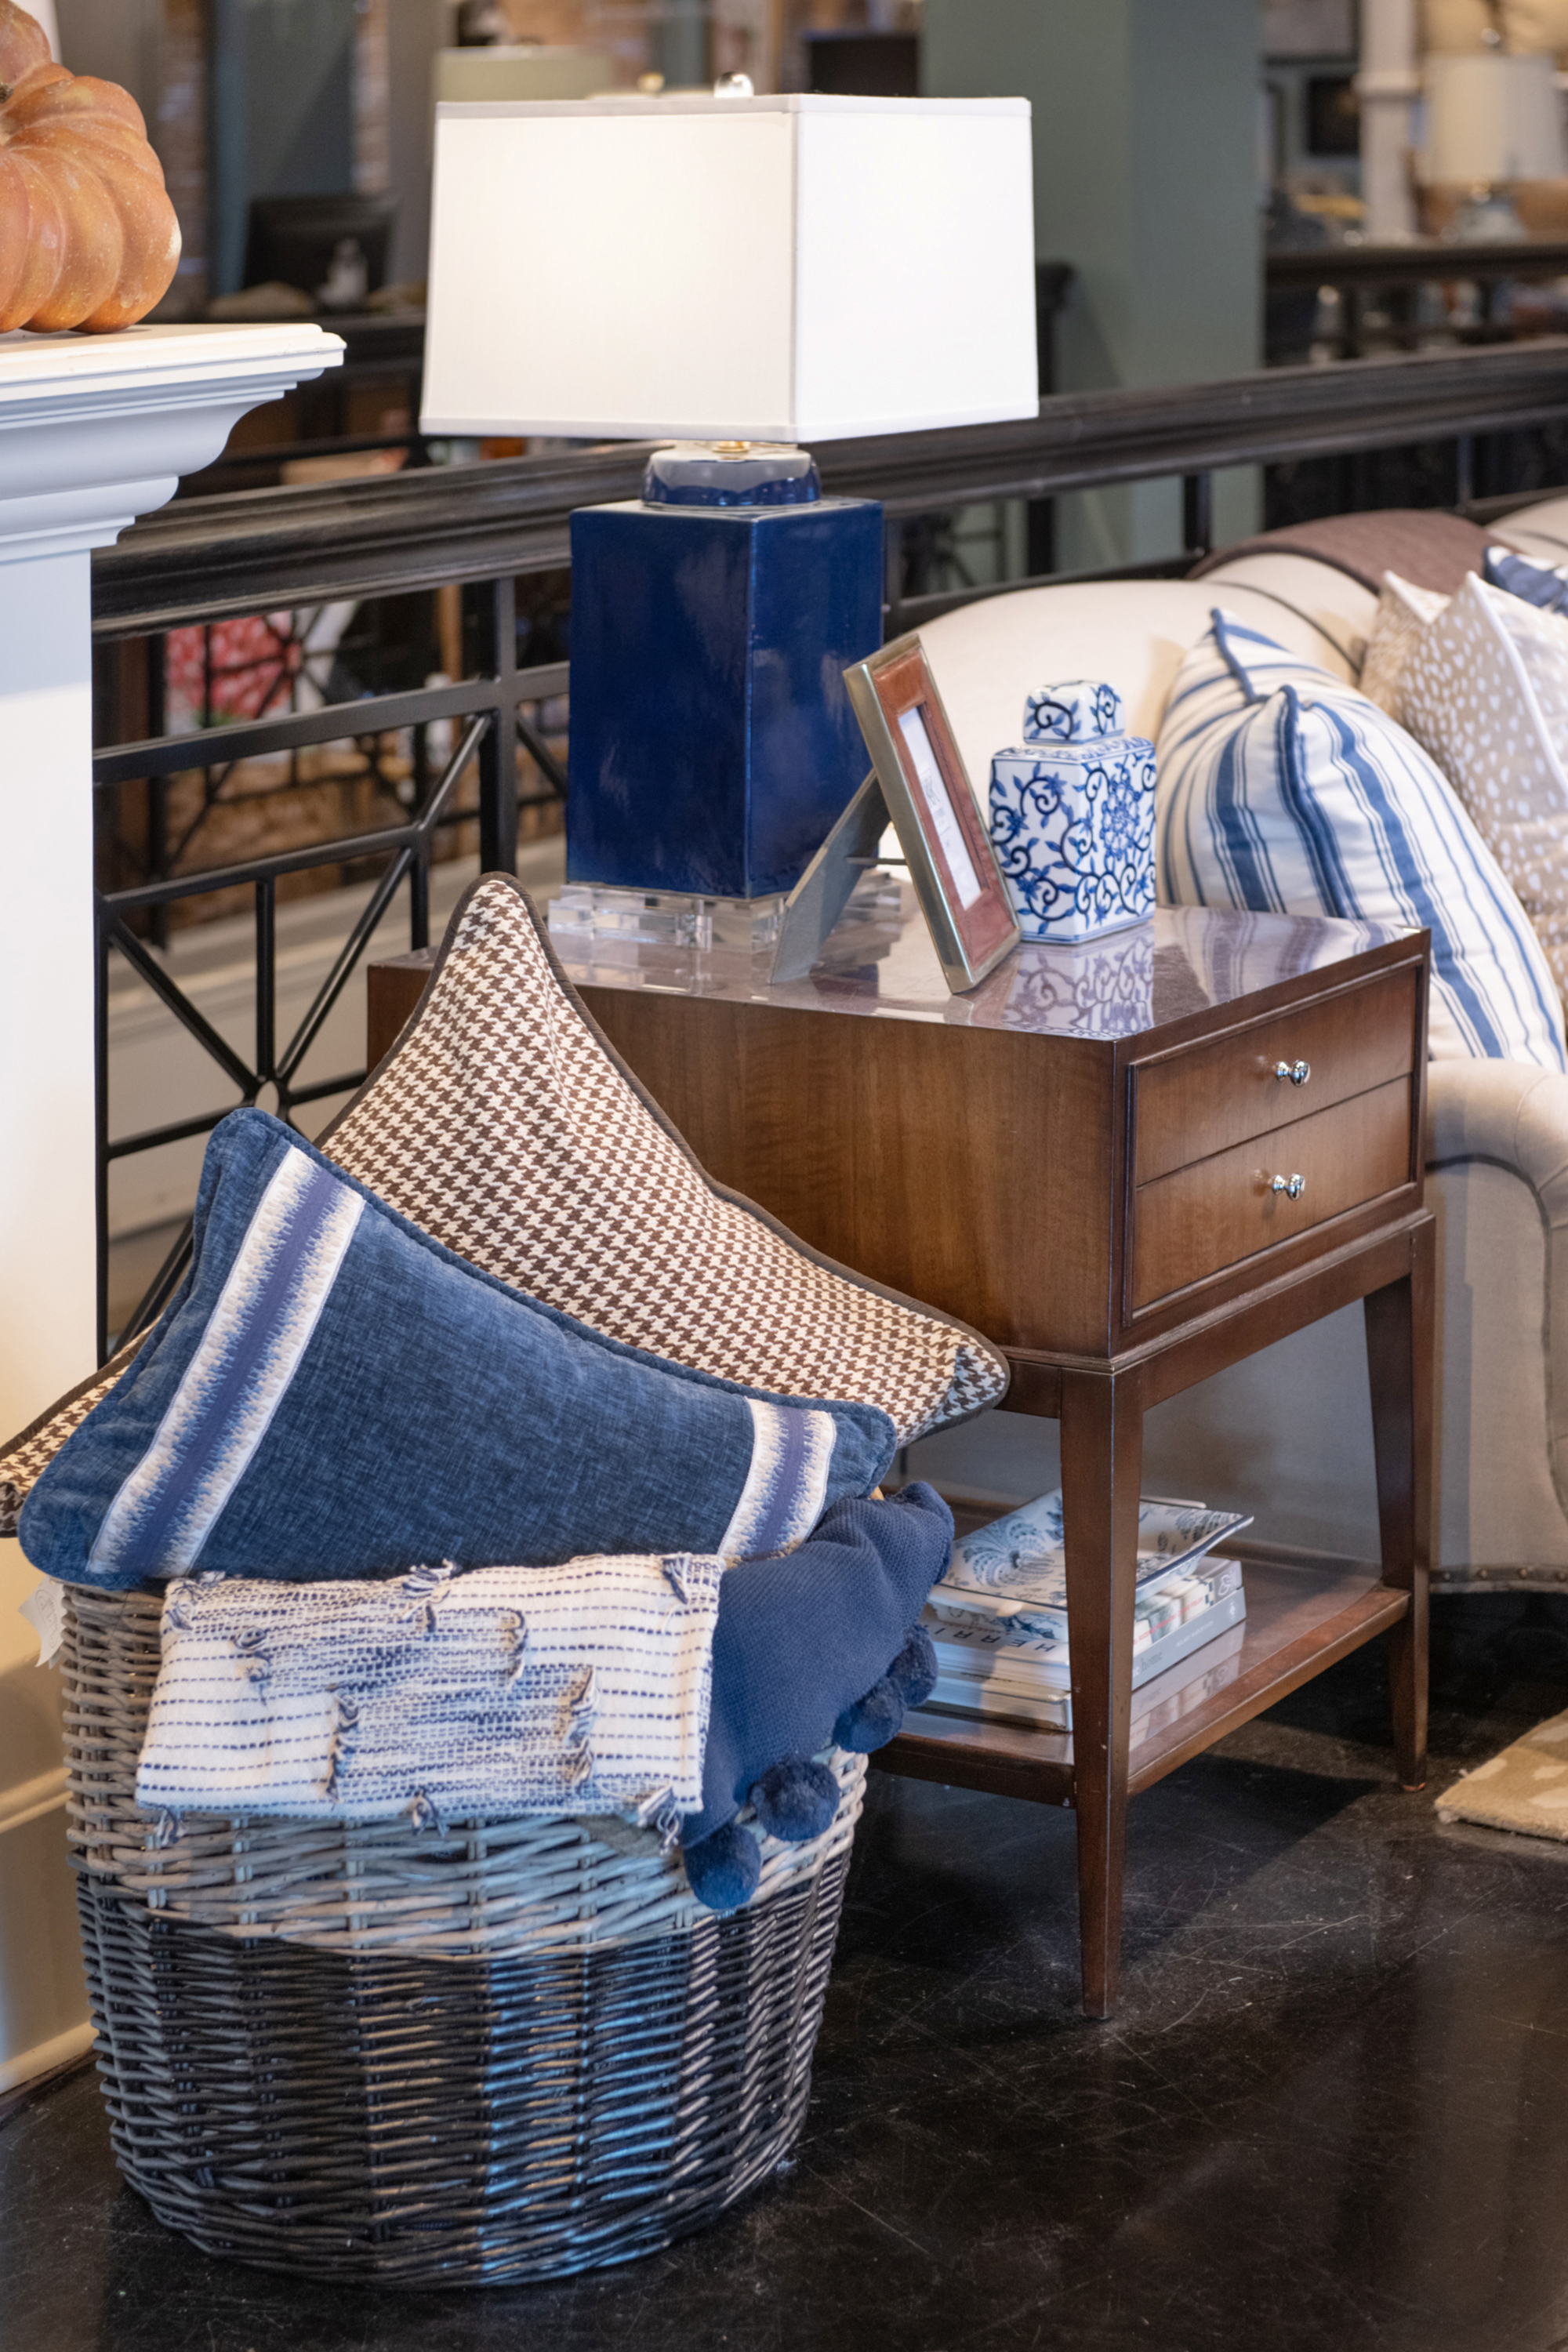 This decorative basket stands out with blue and white pillows and throws featured inside. 